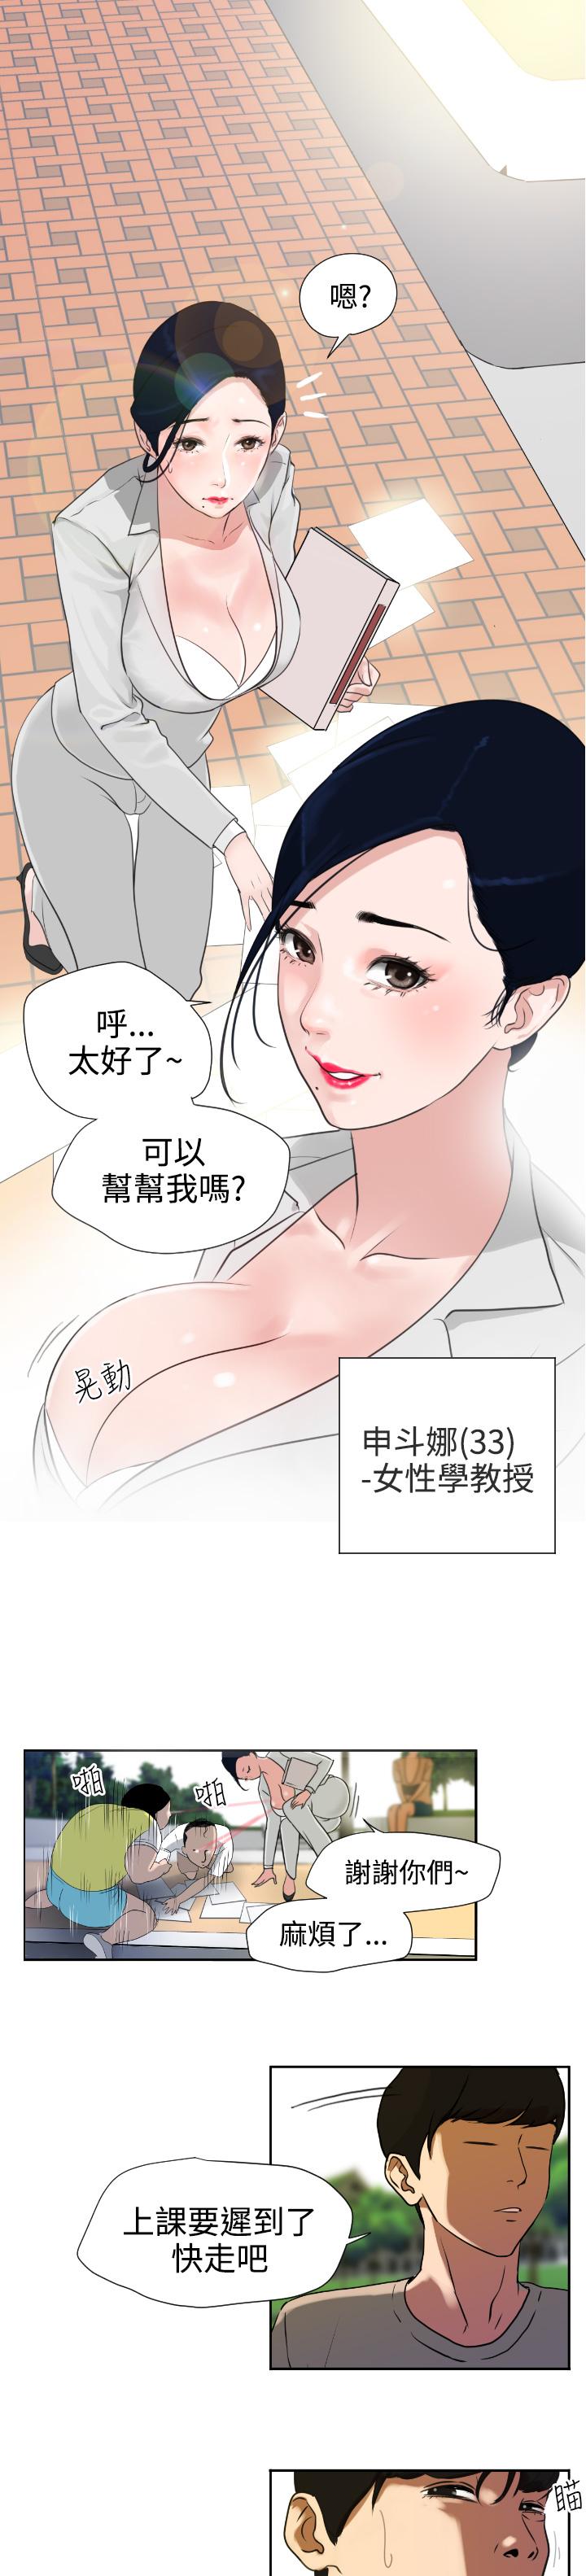 Desire King (慾求王) Ch.1-4 (chinese) 14